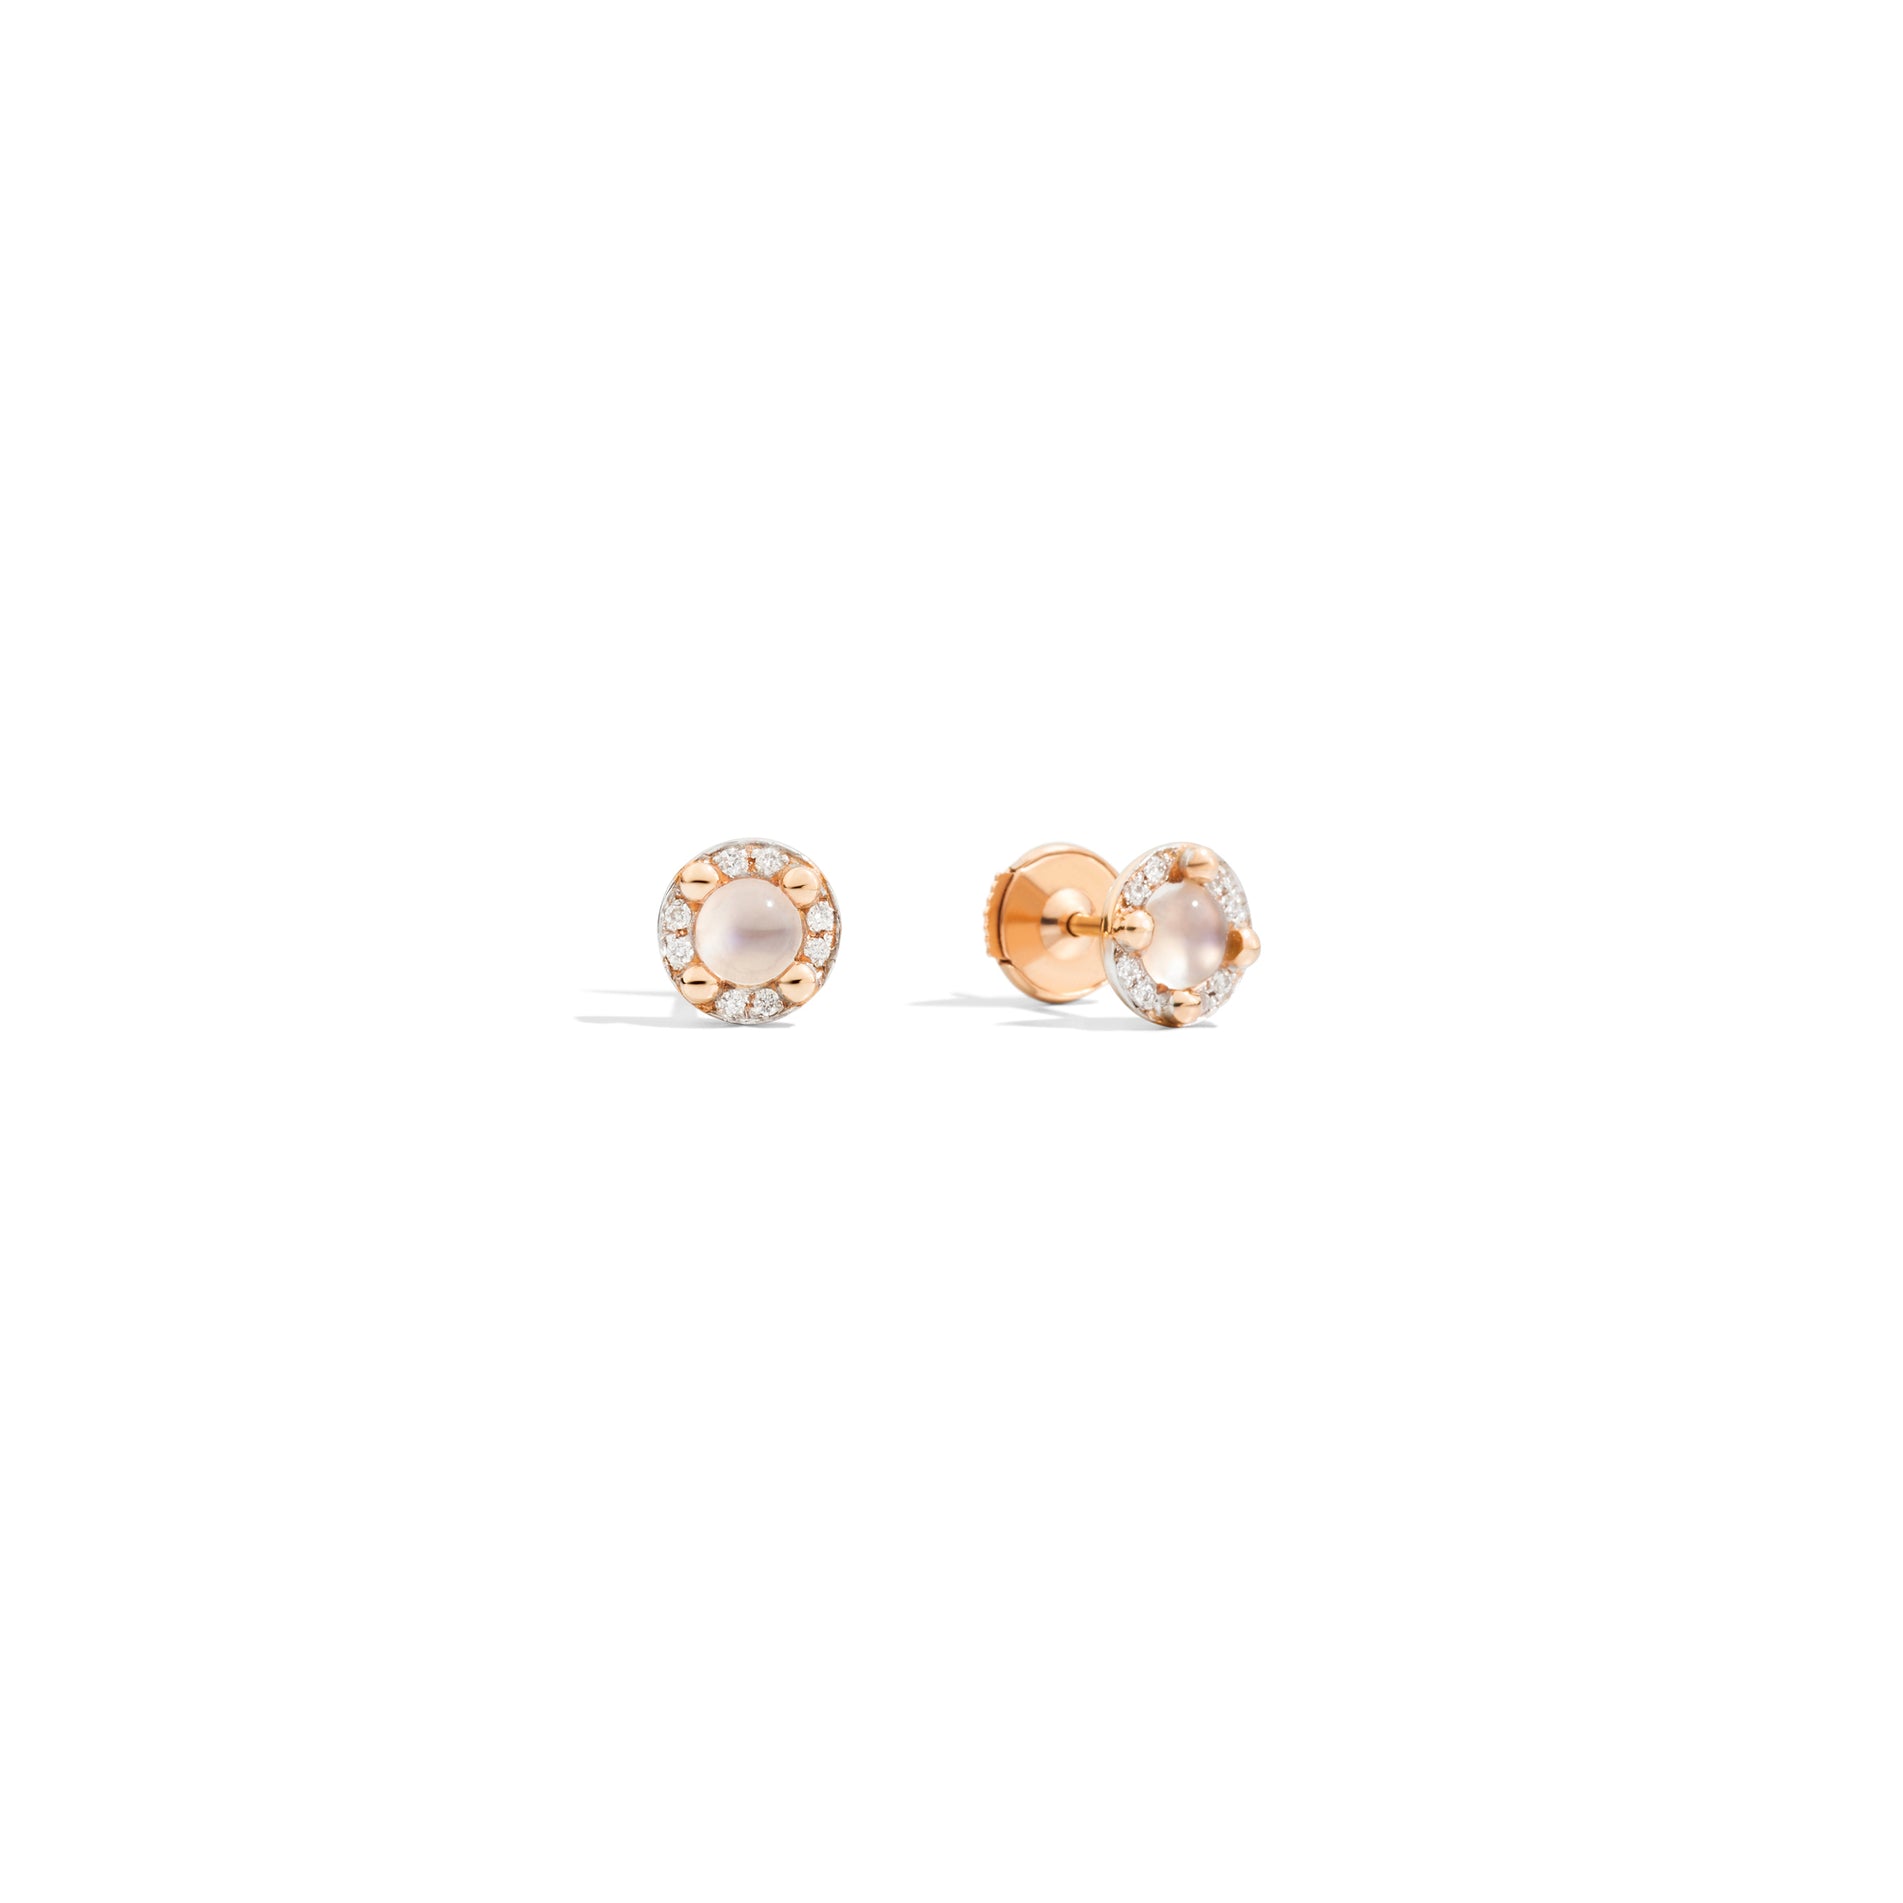 M'ama non M'ama Earrings in 18k Rose Gold with Moonstone and Diamonds - Orsini Jewellers NZ